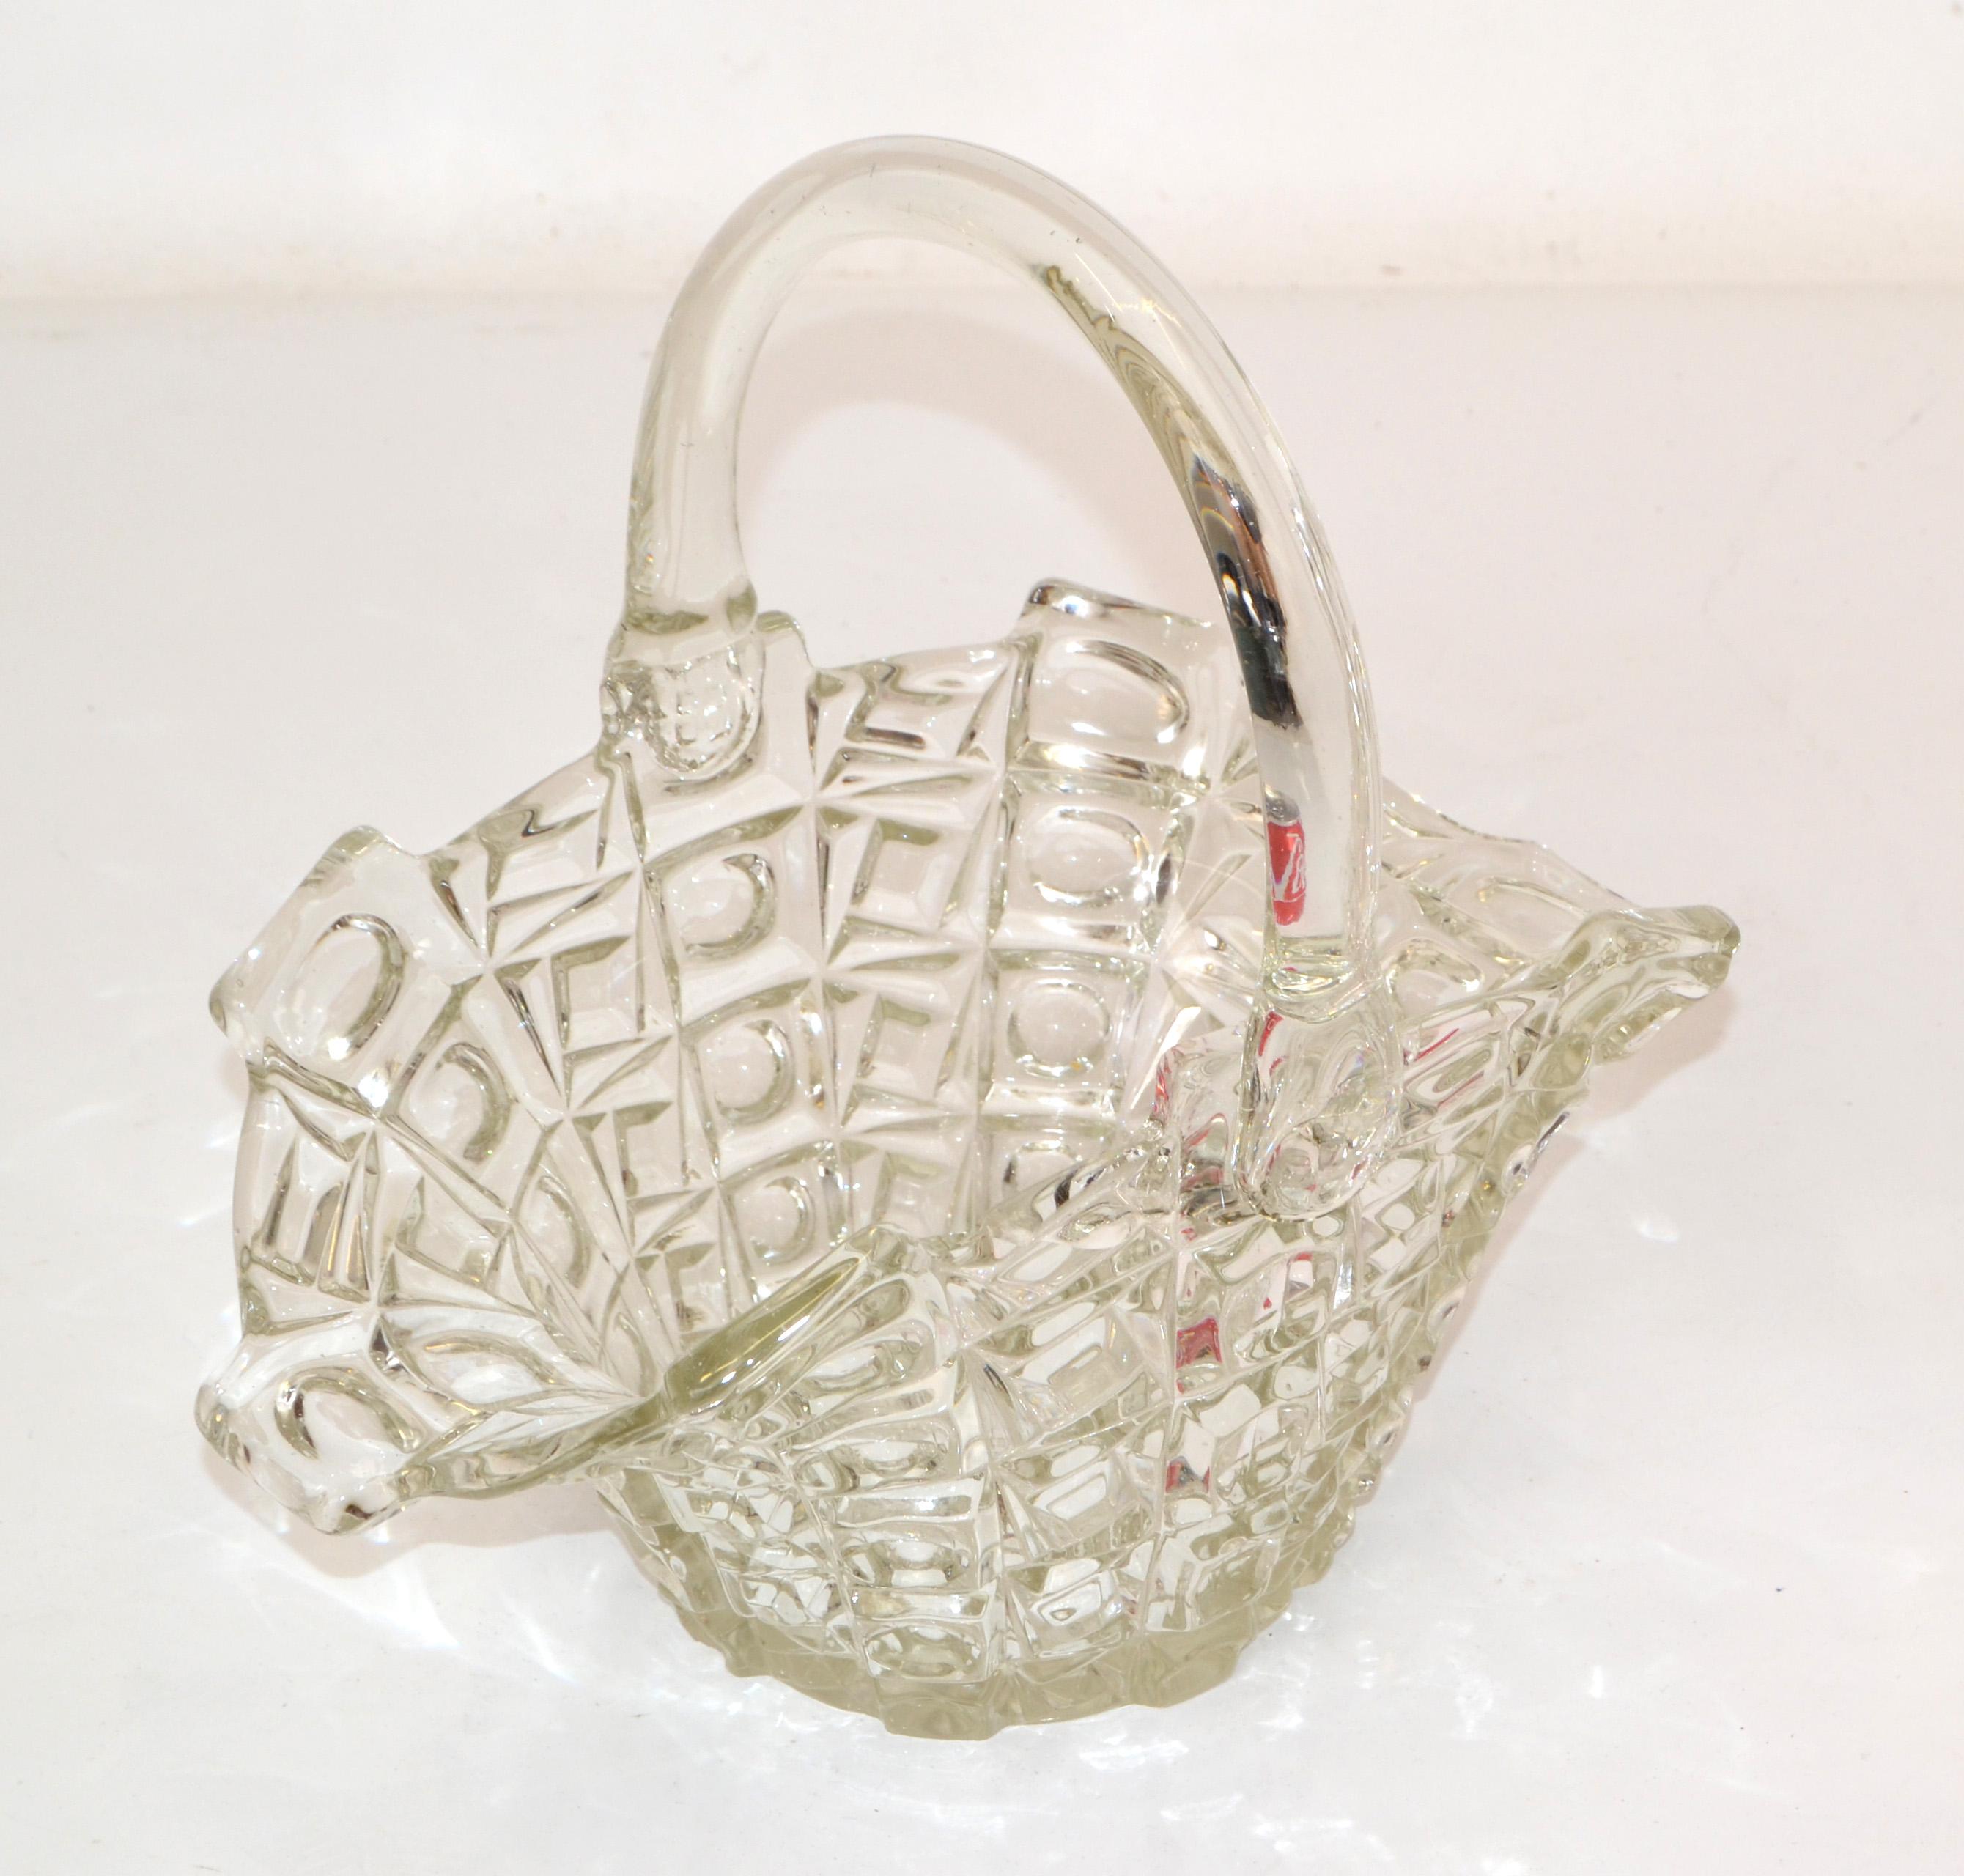 Vintage 1970 Decorative Clear Crystal Glass Bride Basket with Handle Centerpiece In Good Condition For Sale In Miami, FL